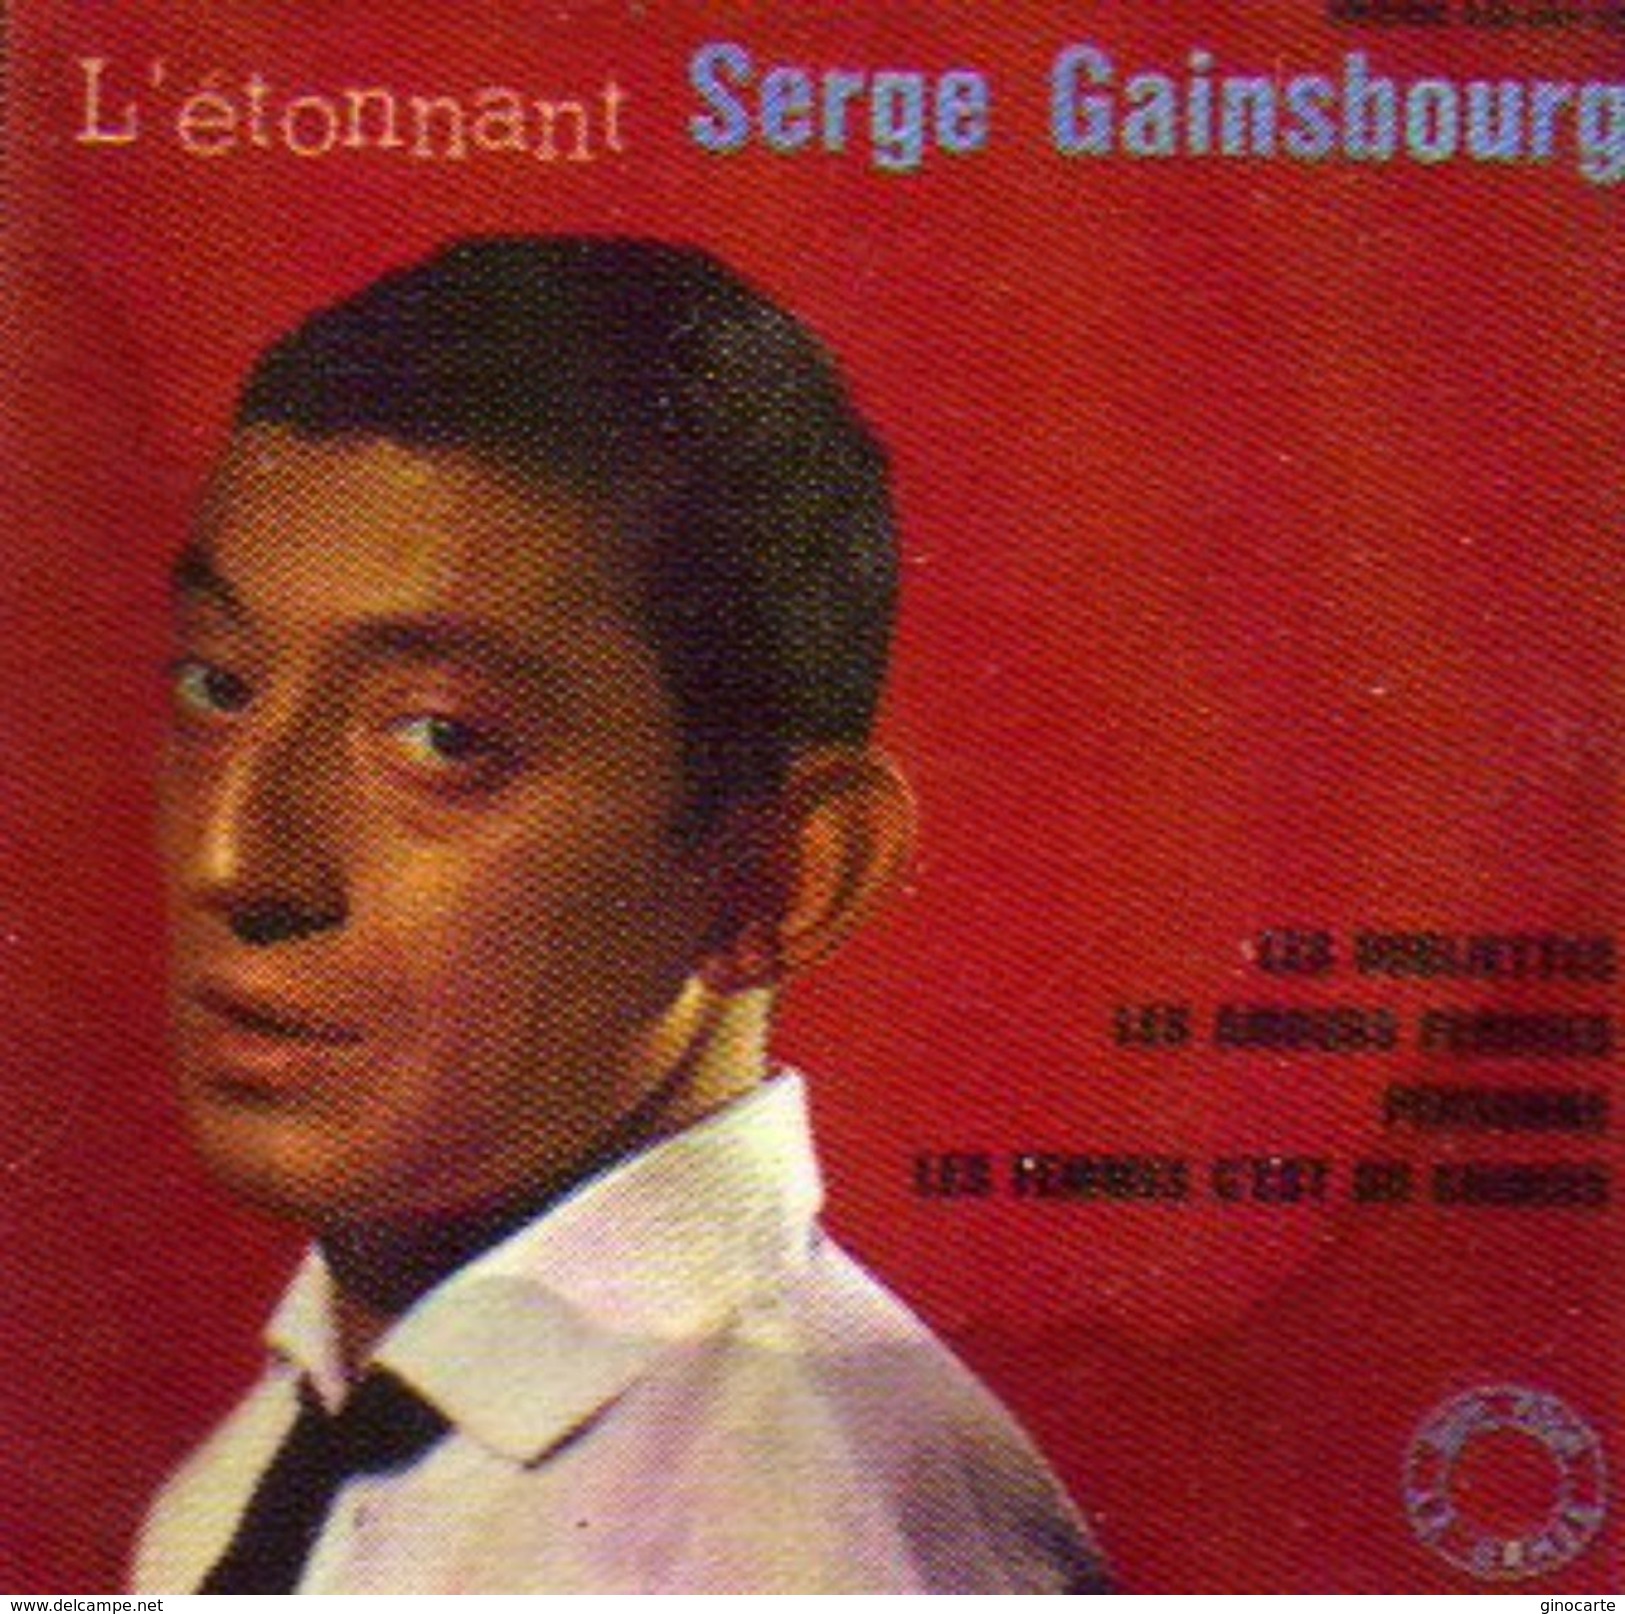 Magnets Magnet 45 Tours Serge Gainsbourg L'etonnant - Characters